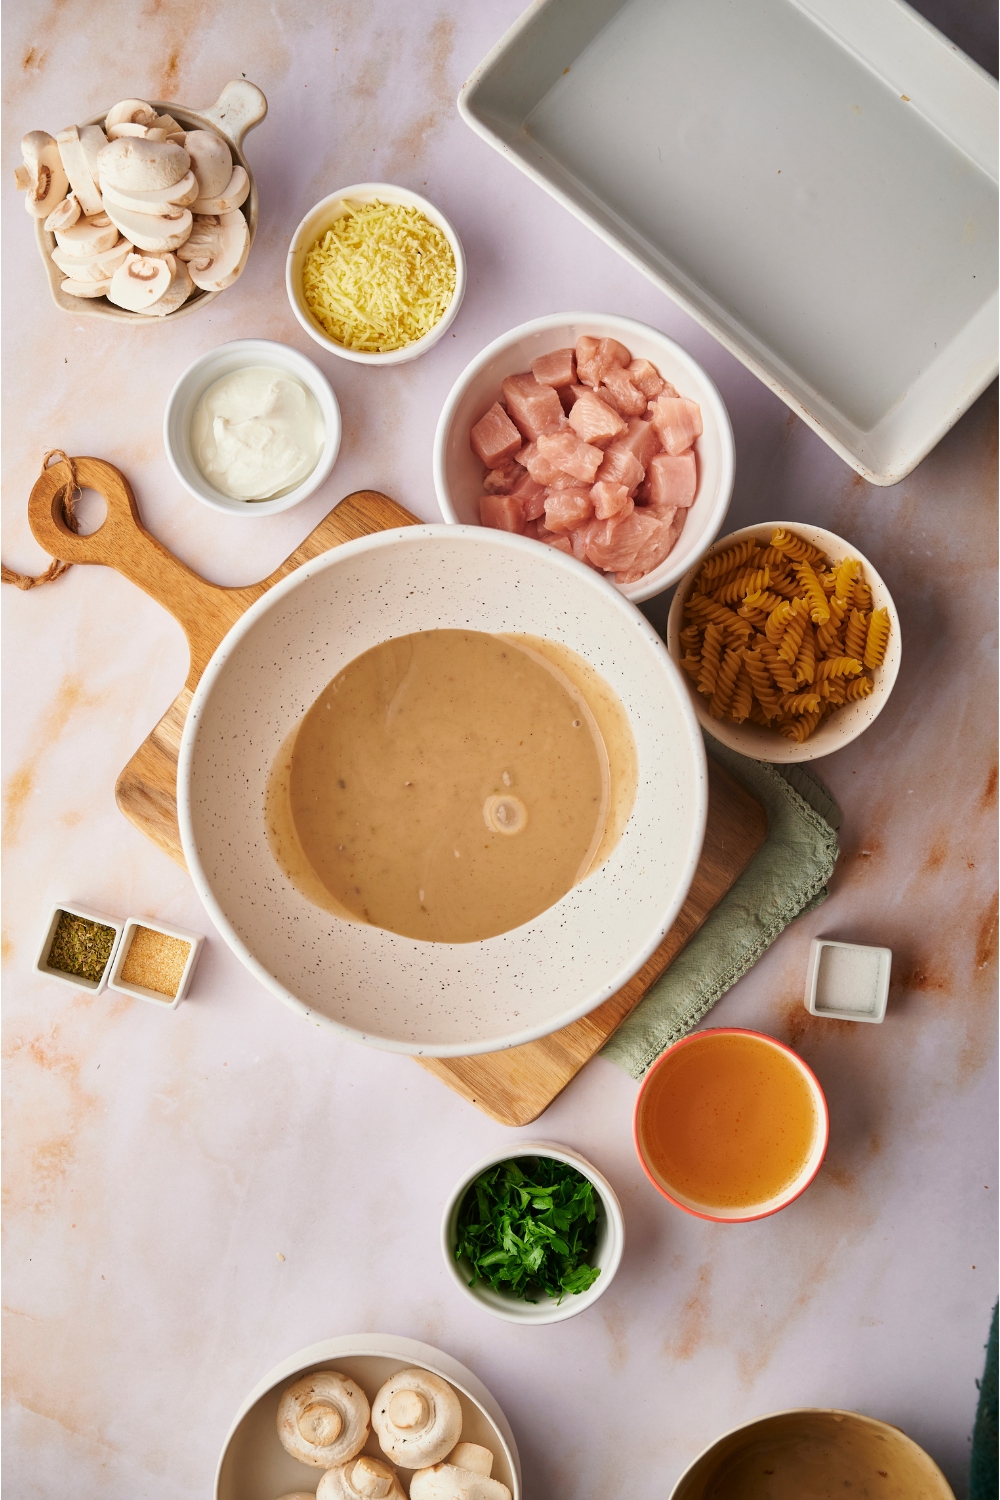 A white bowl filled with a creamy soup mixture and surrounded by ingredients including bowls of raw chicken, dried pasta, broth, raw sliced mushrooms, spices, and sour cream.